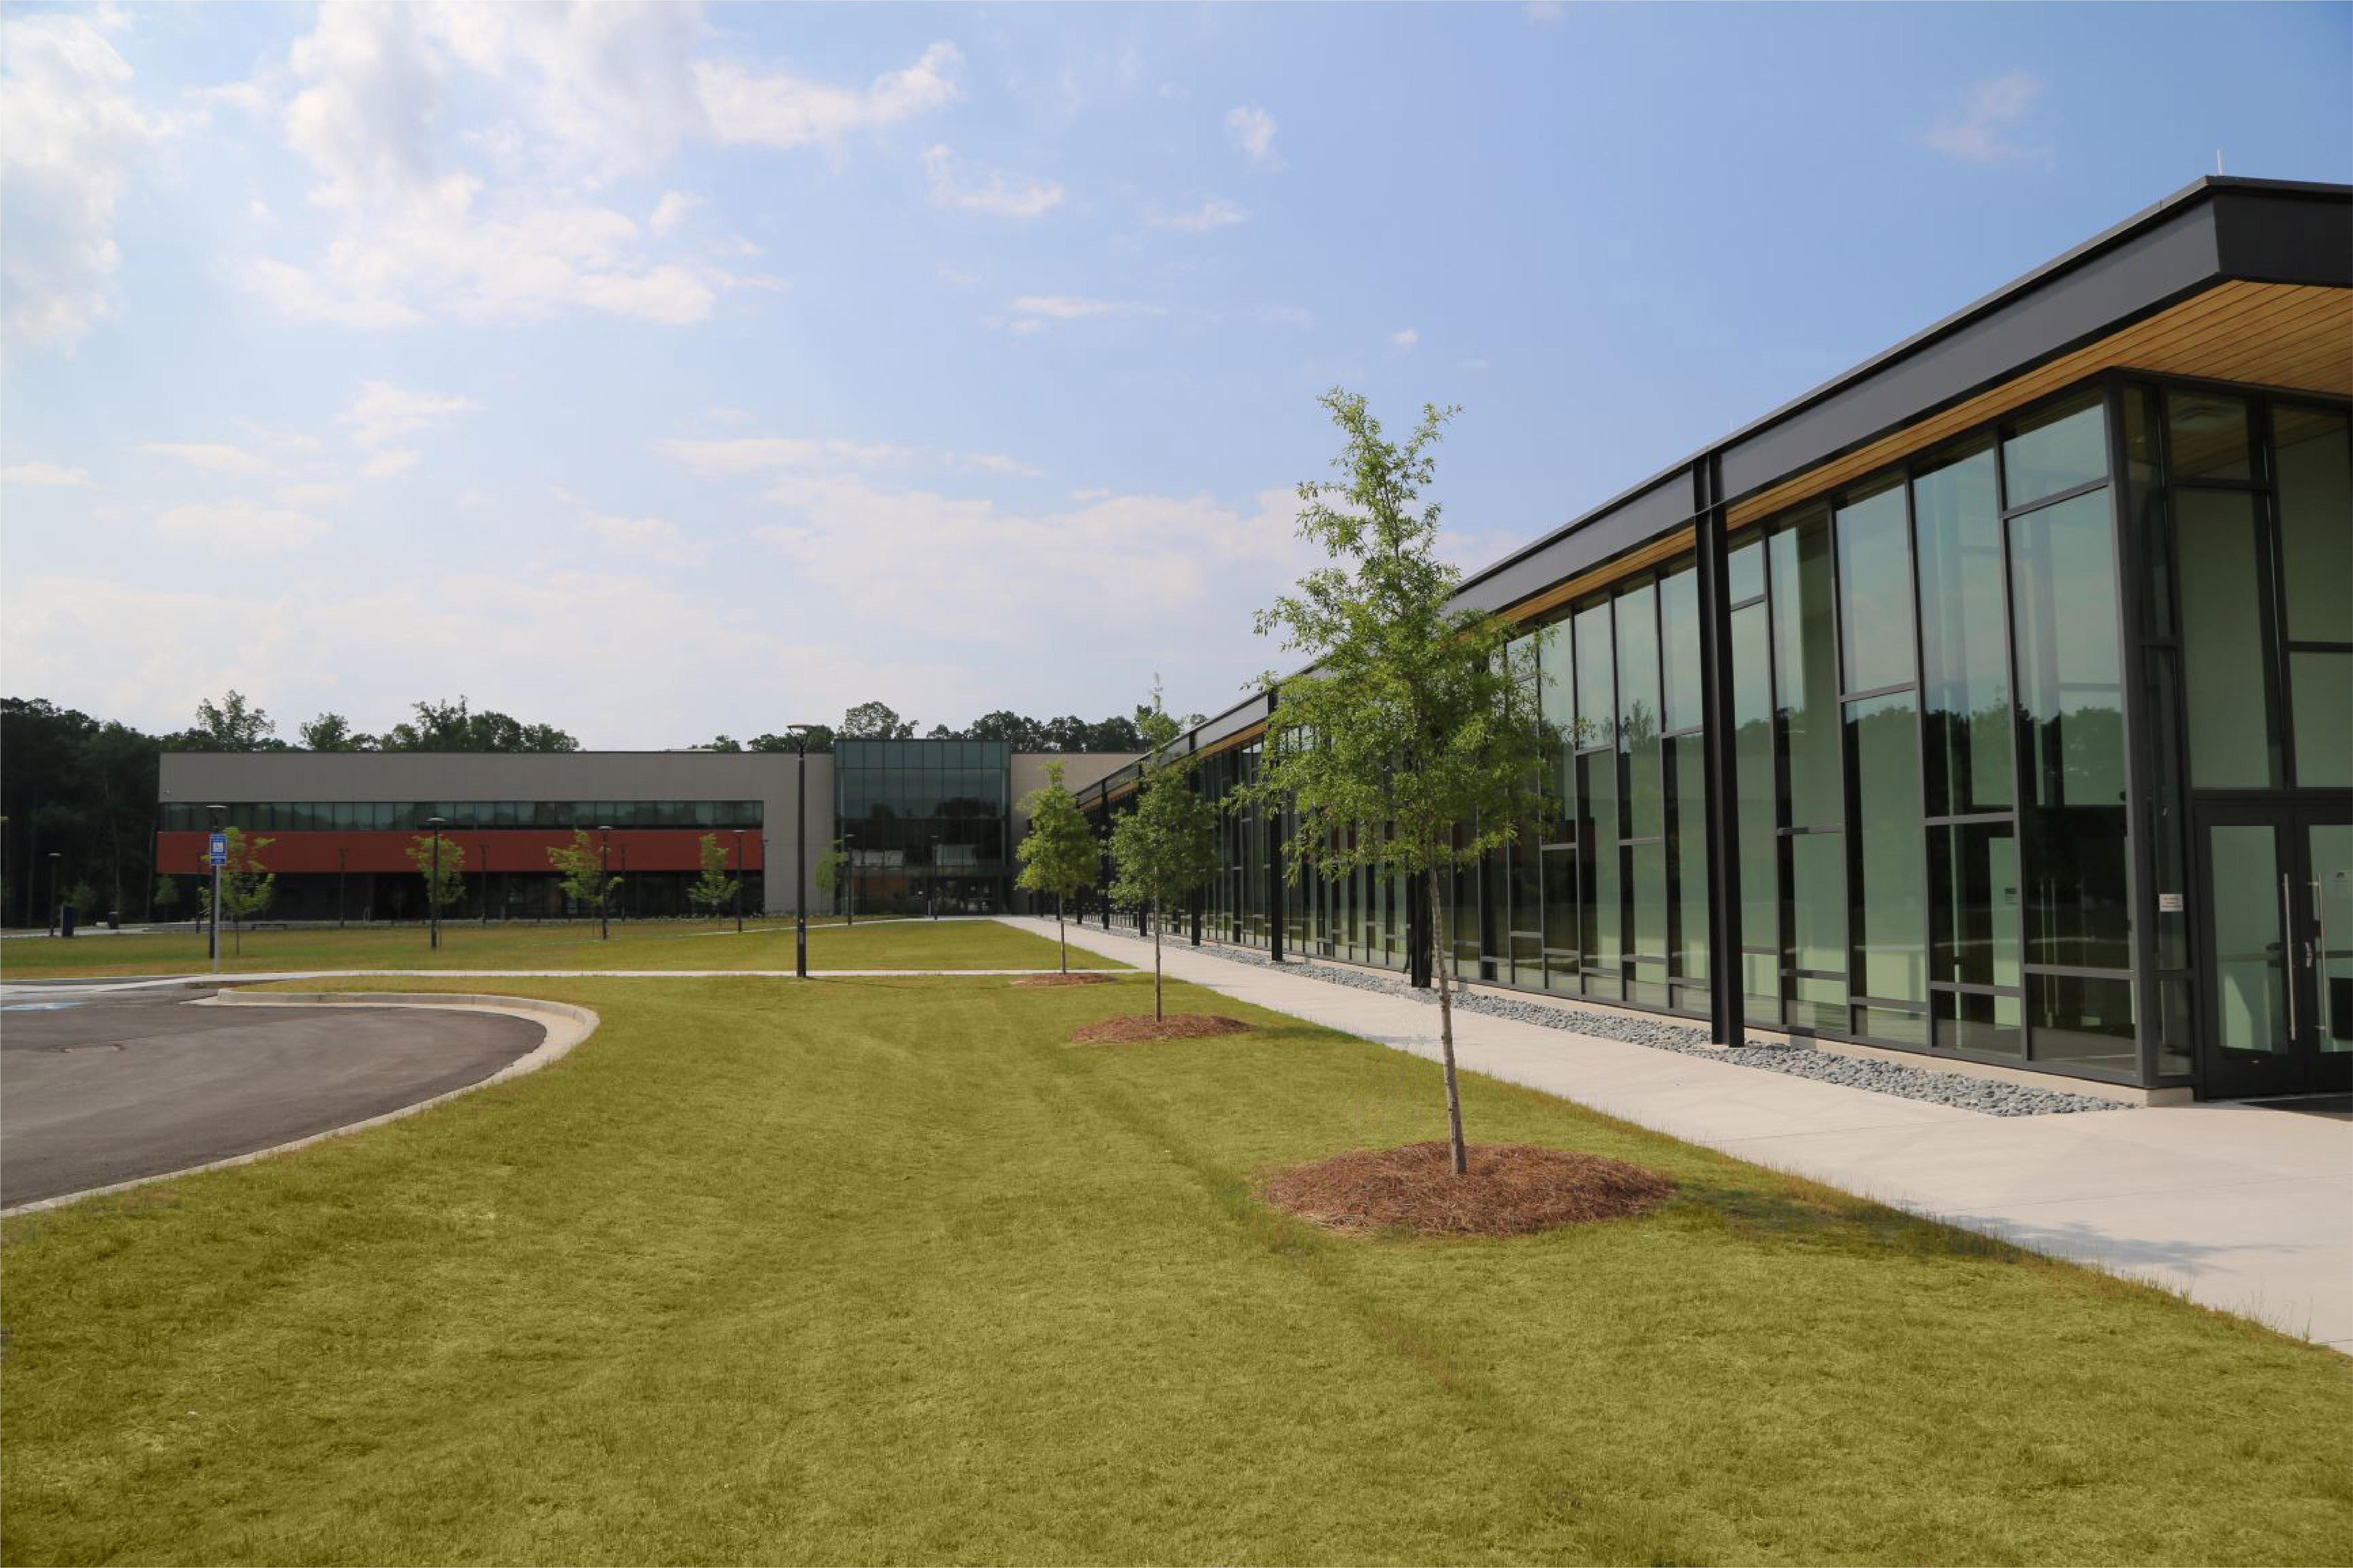 In September 2019, GNTC celebrated the completion of a major campus addition with a Ribbon Cutting Ceremony for the new 80,000-square-foot administrative and classroom facility located at the Whitfield Murray Campus.